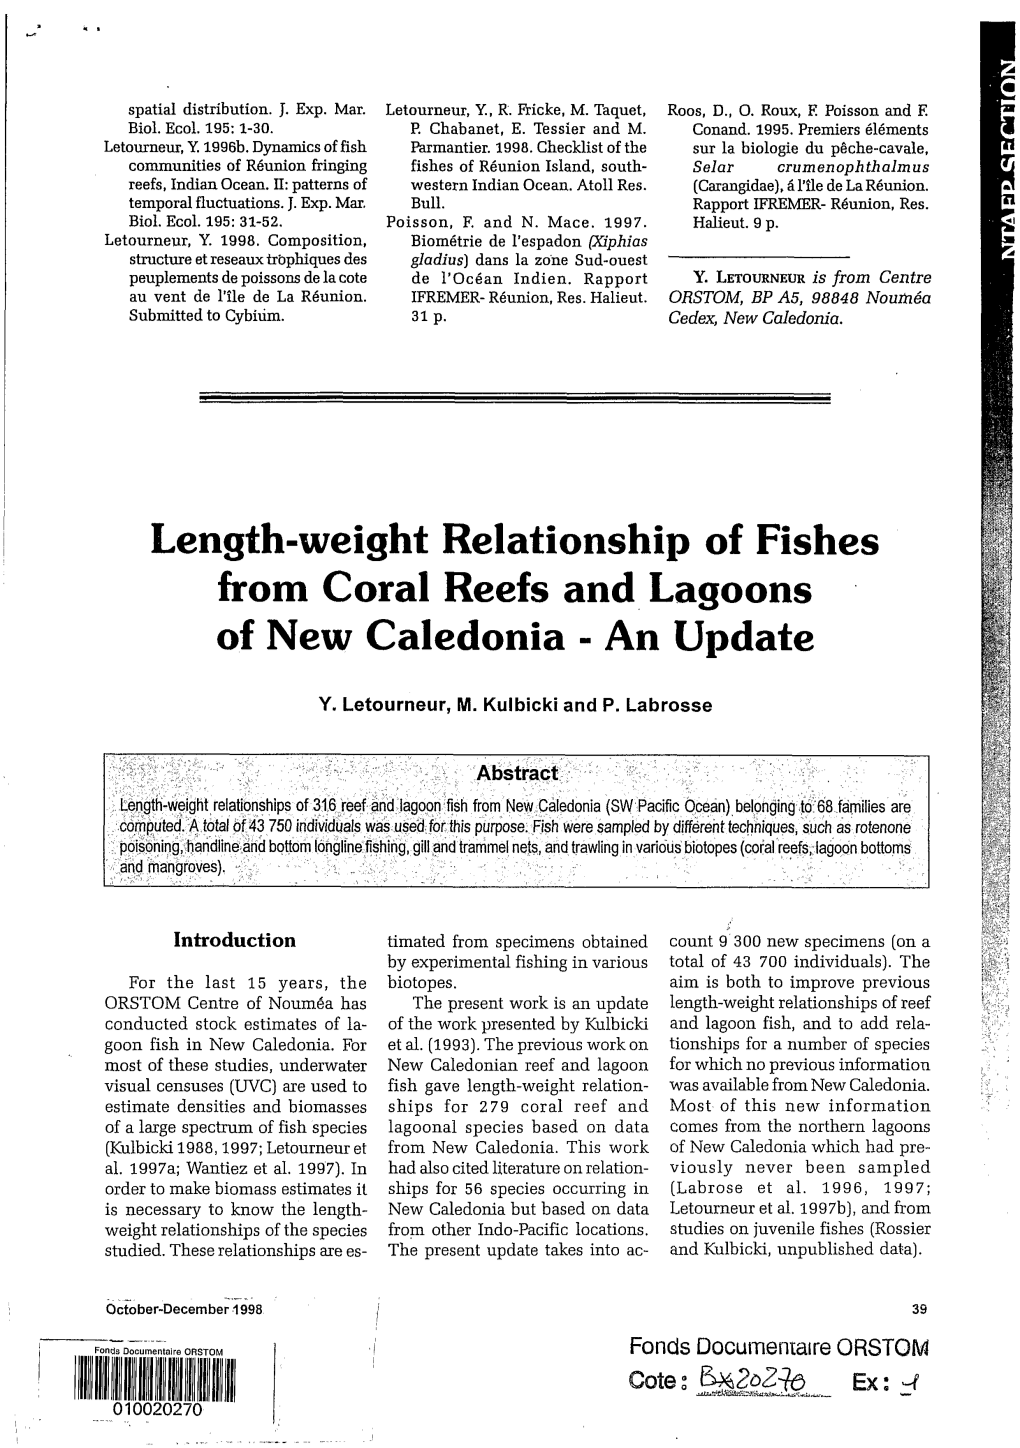 Length-Weight Relationship of Fishes from Coral Reefs and Lagoons of New Caledonia - an Update